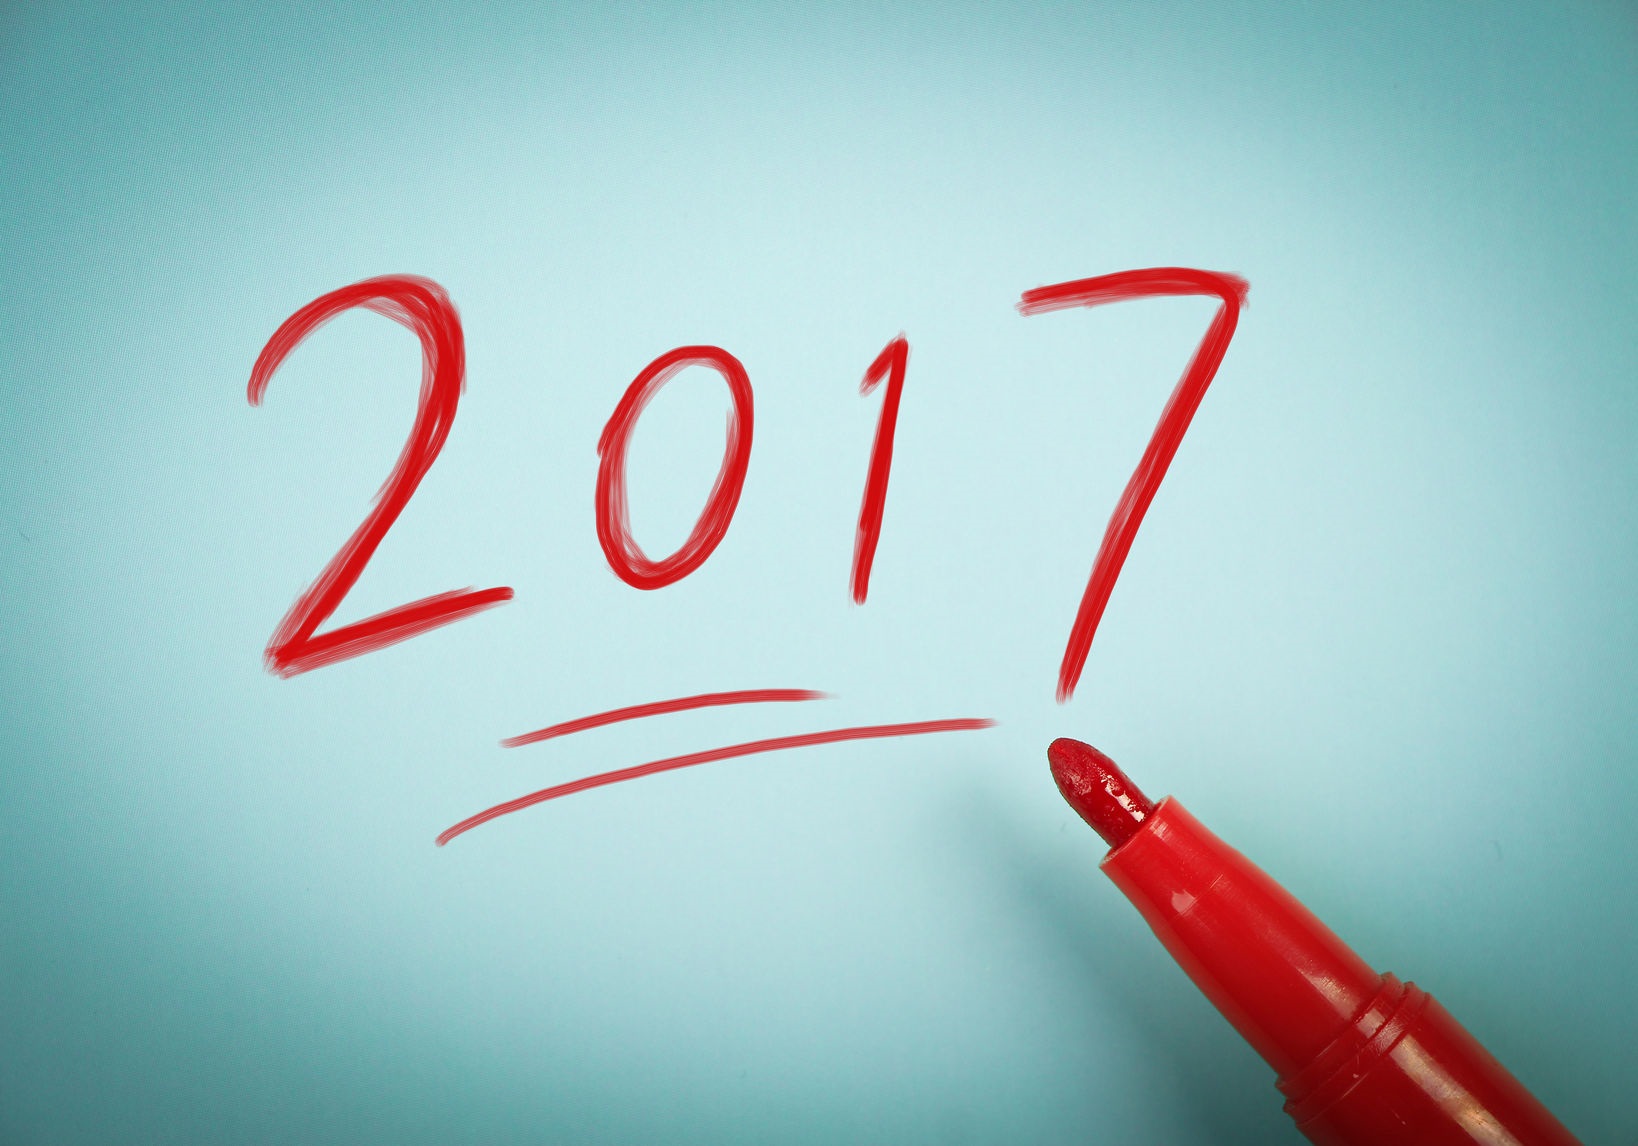 62391685 - concept of new year 2017 ahead for background used.